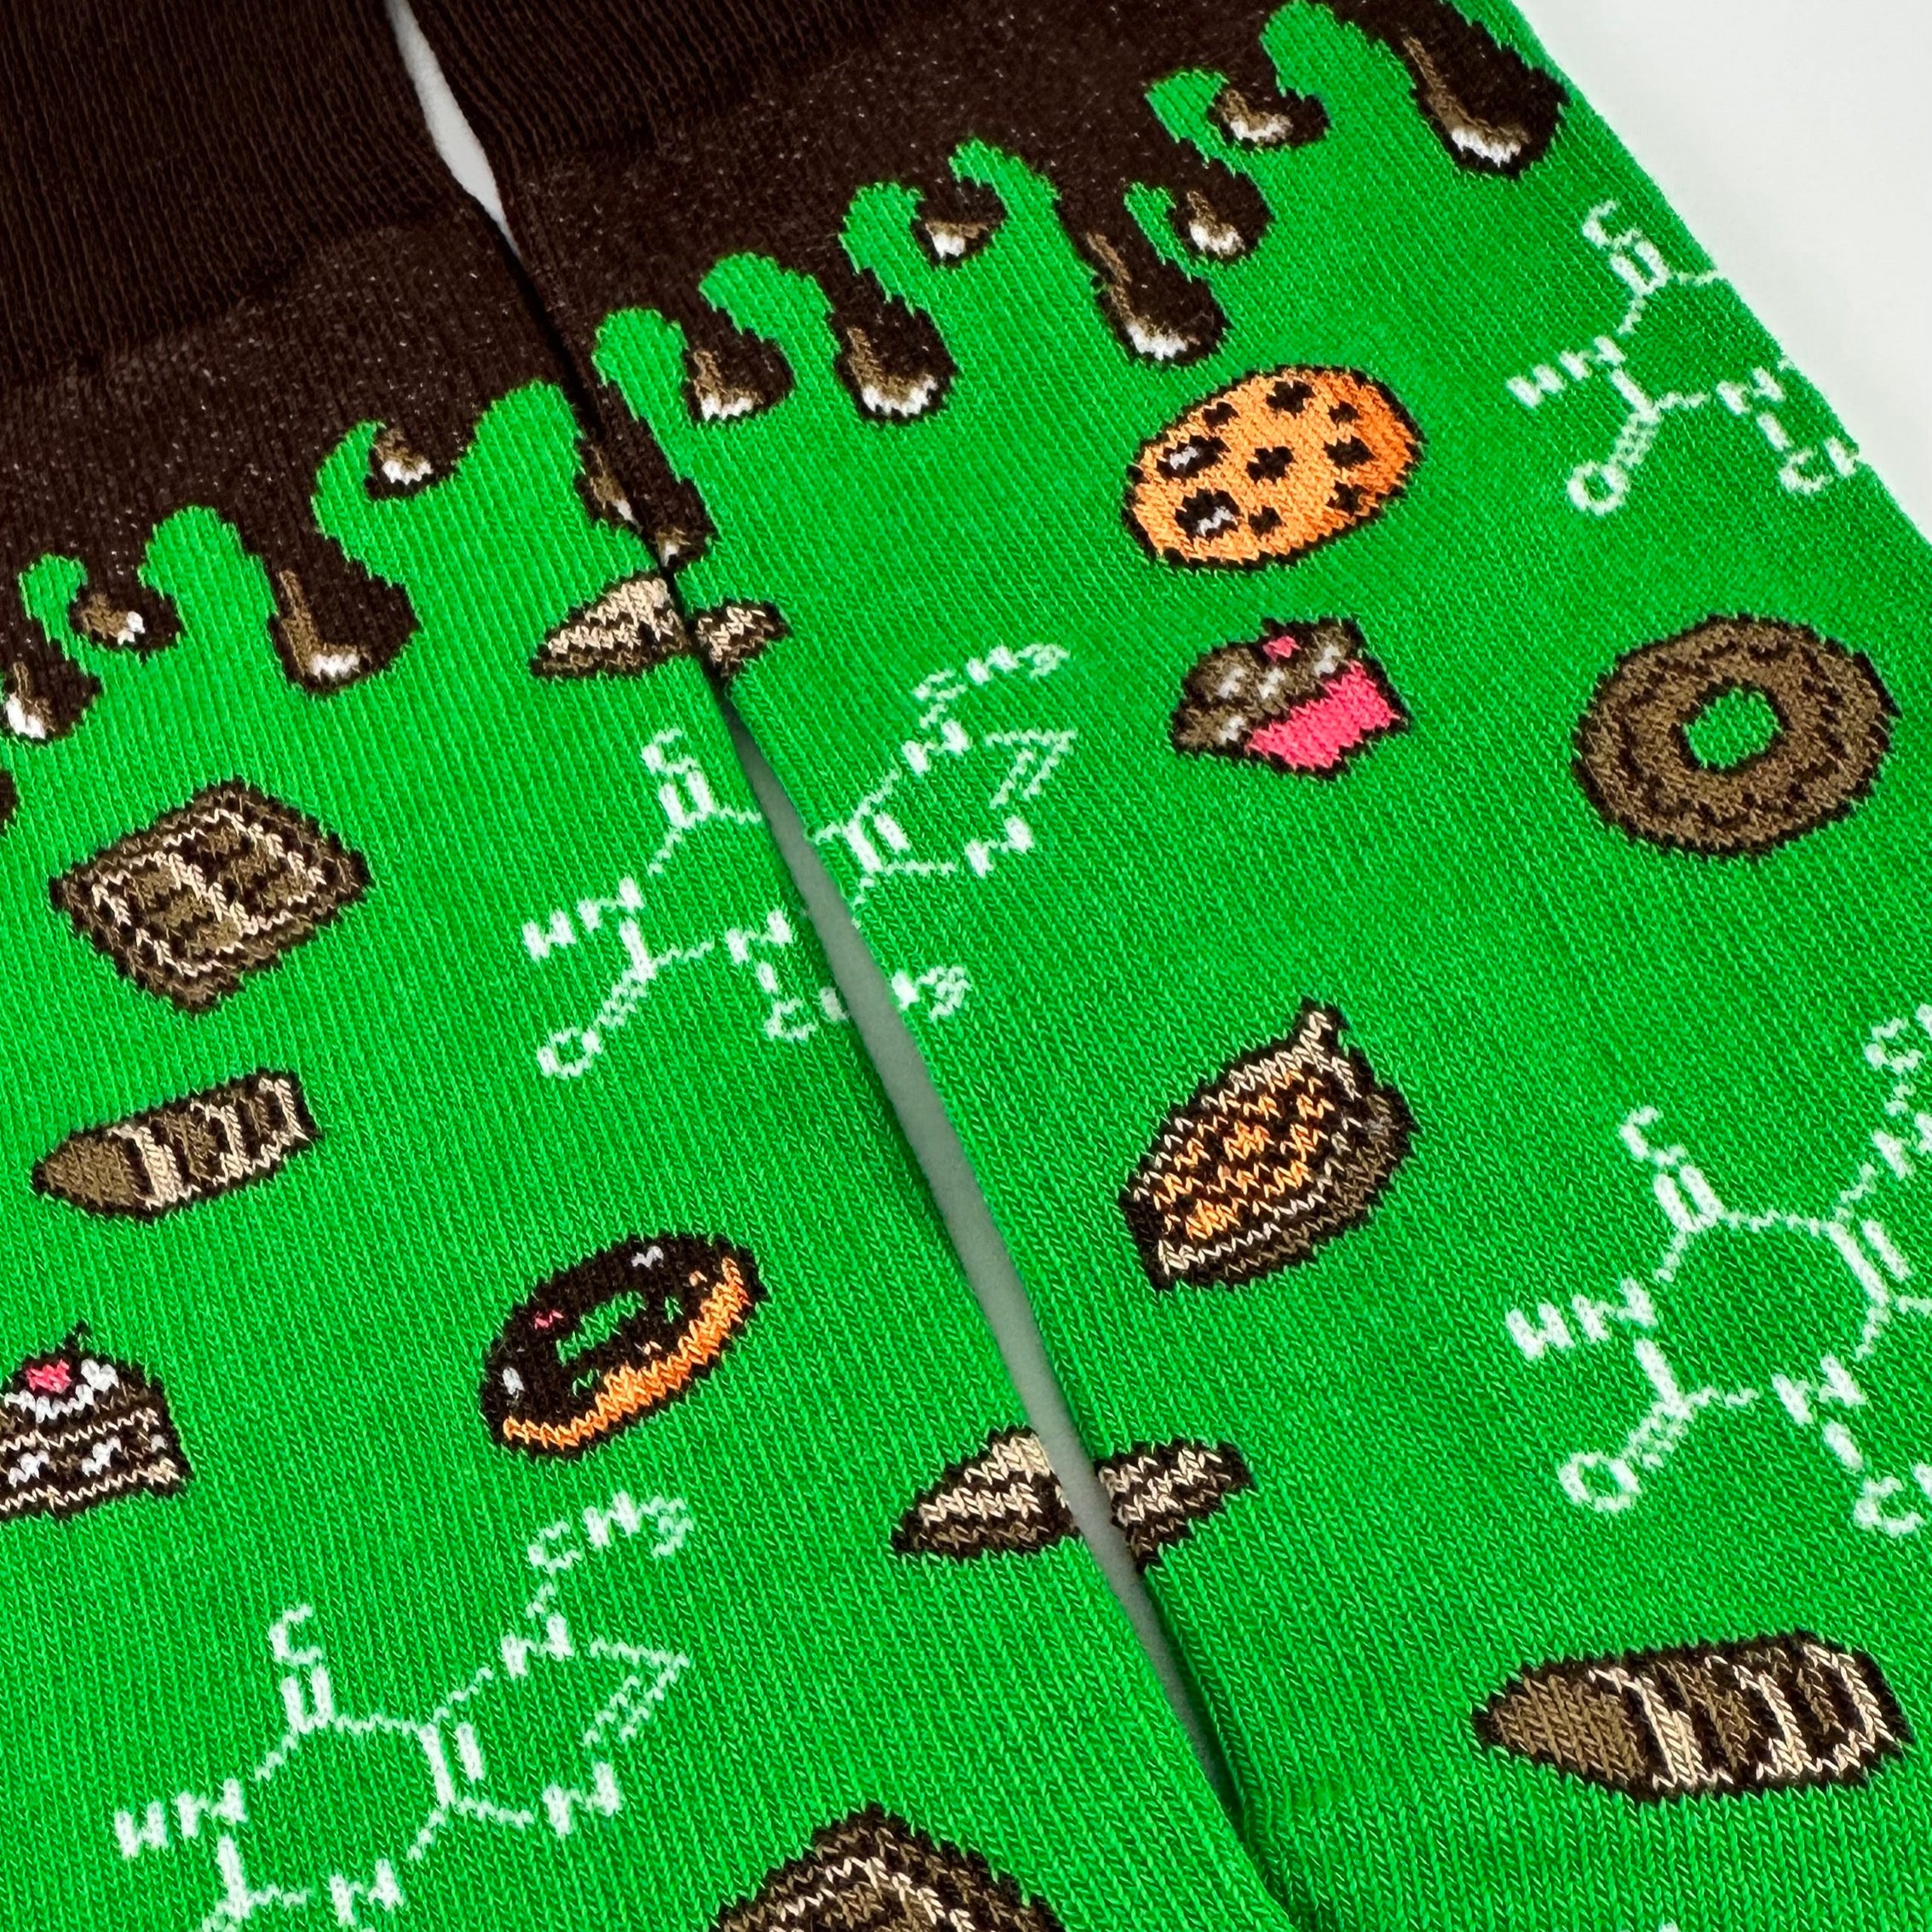 Science of Chocolate Socks from the Sock Panda (Adult Small)